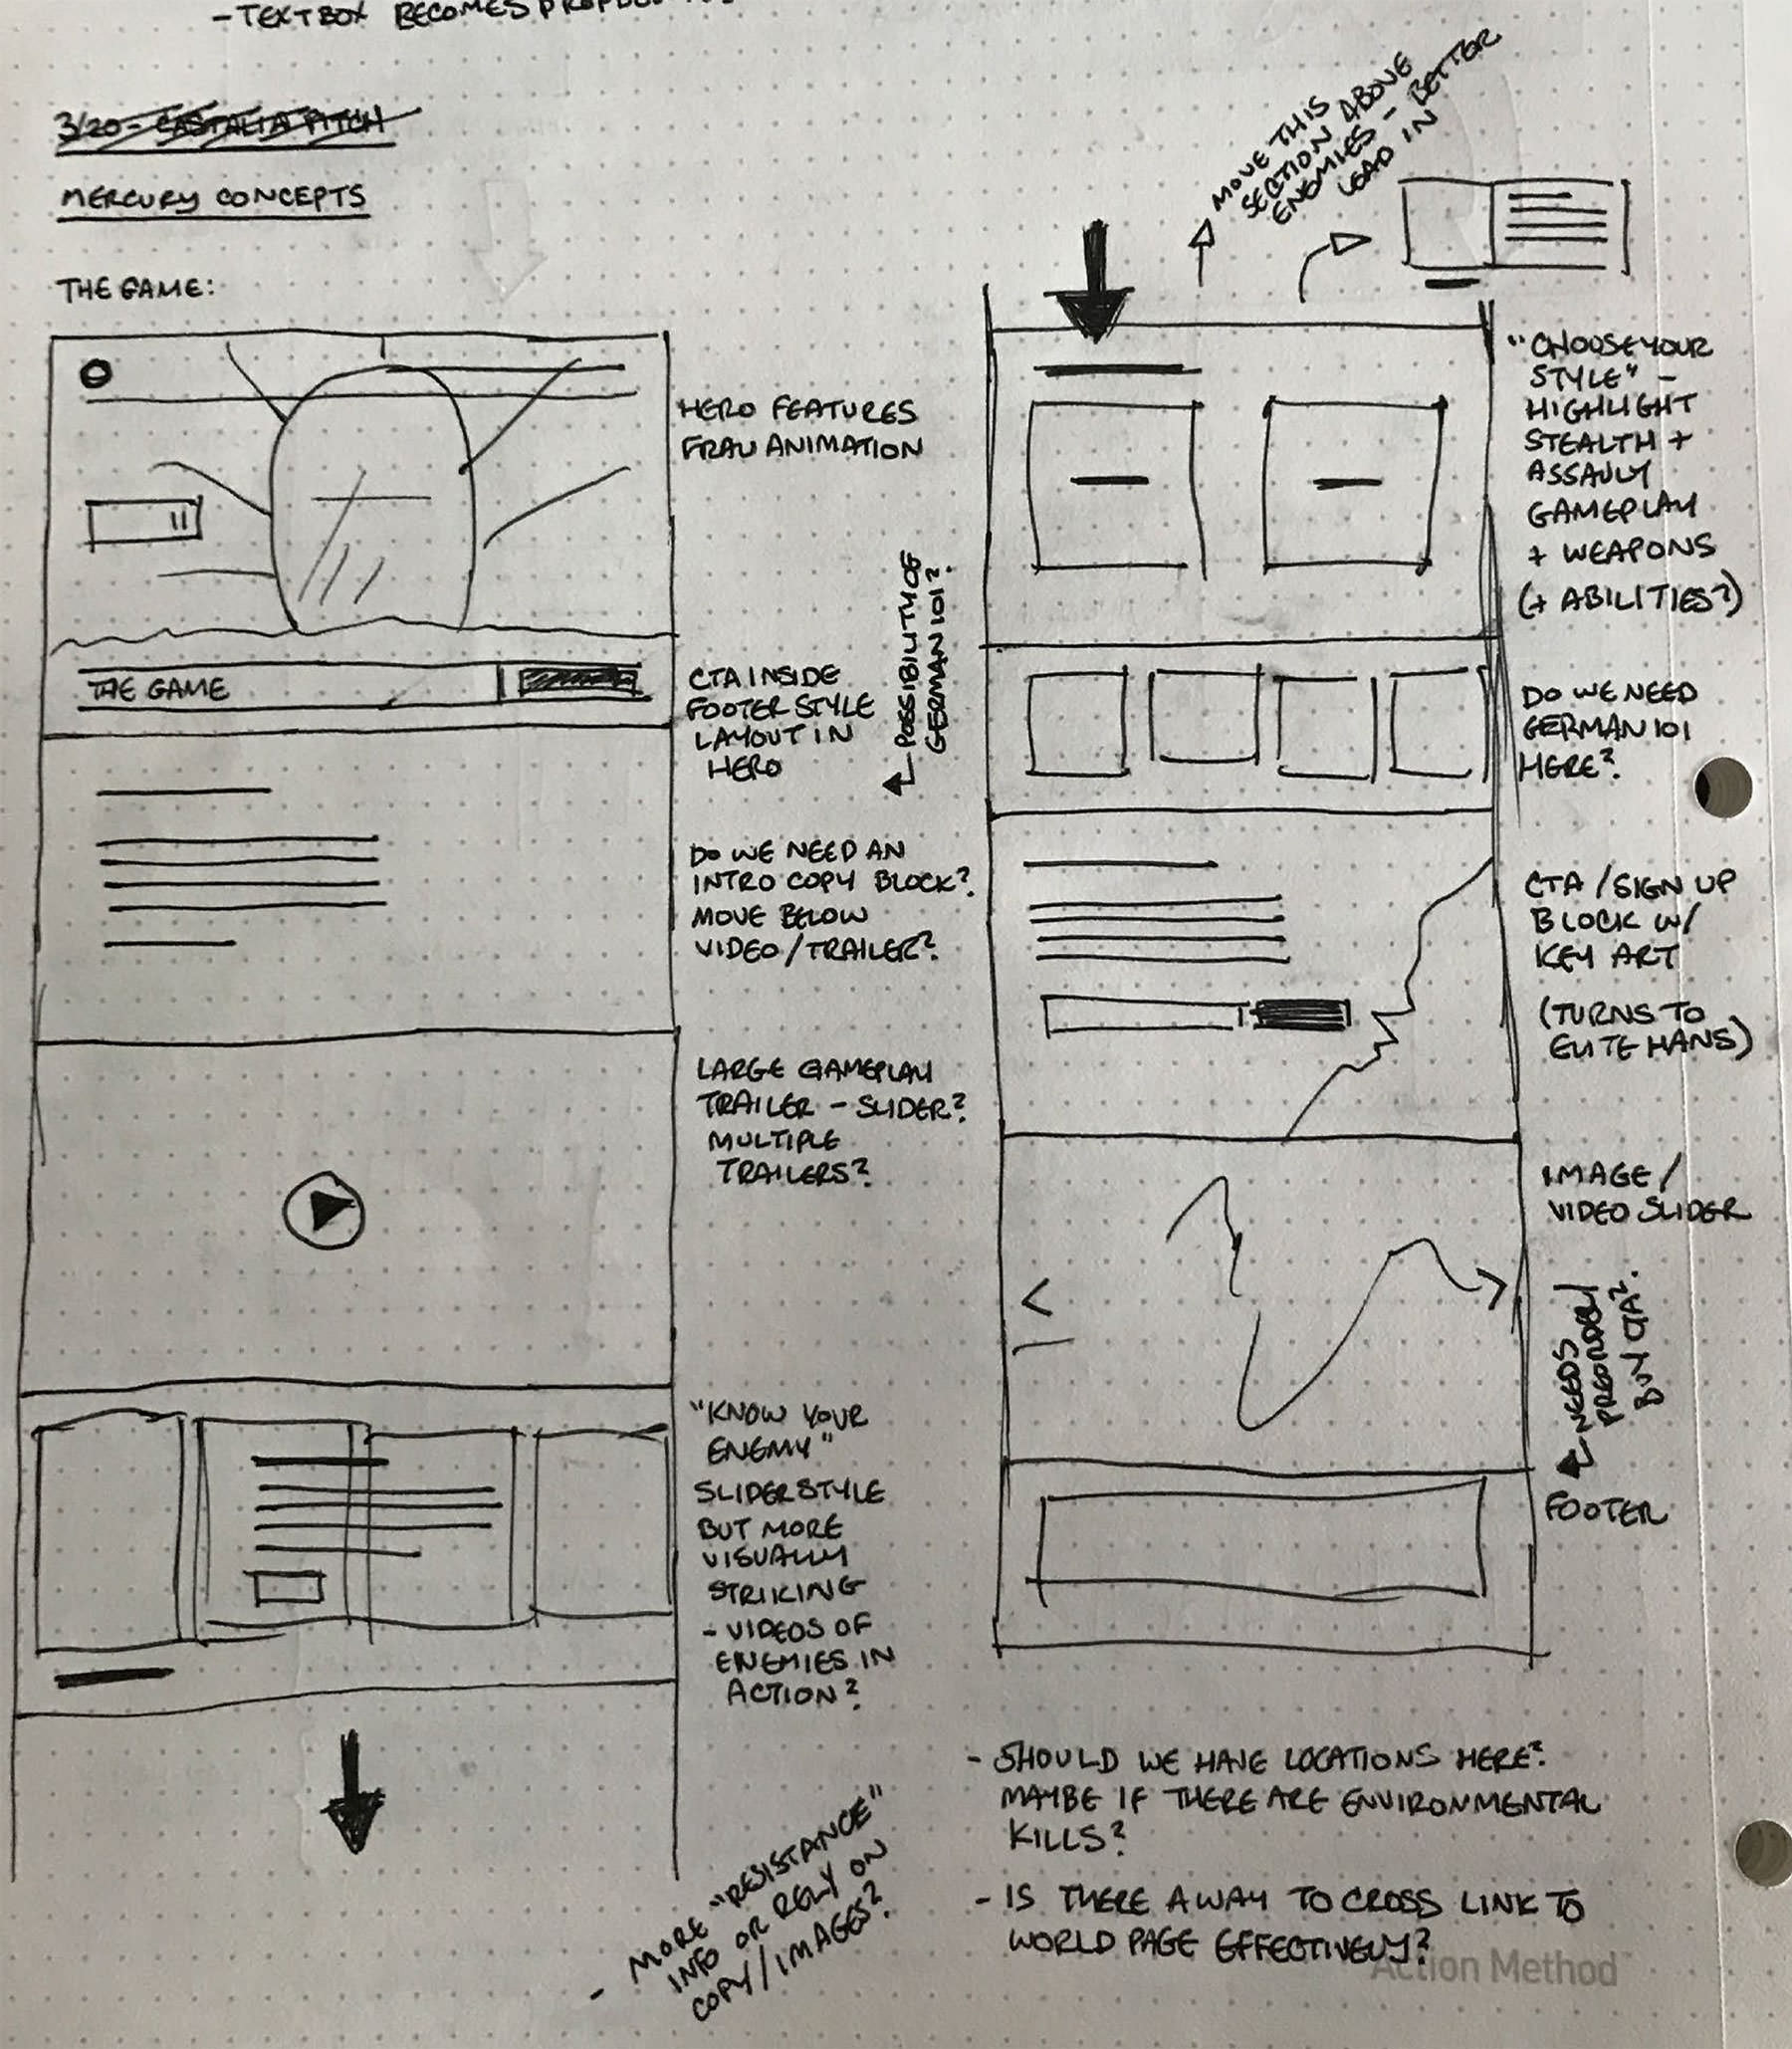 Early hand-drawn sketches and concepts for the Wolfenstein II site